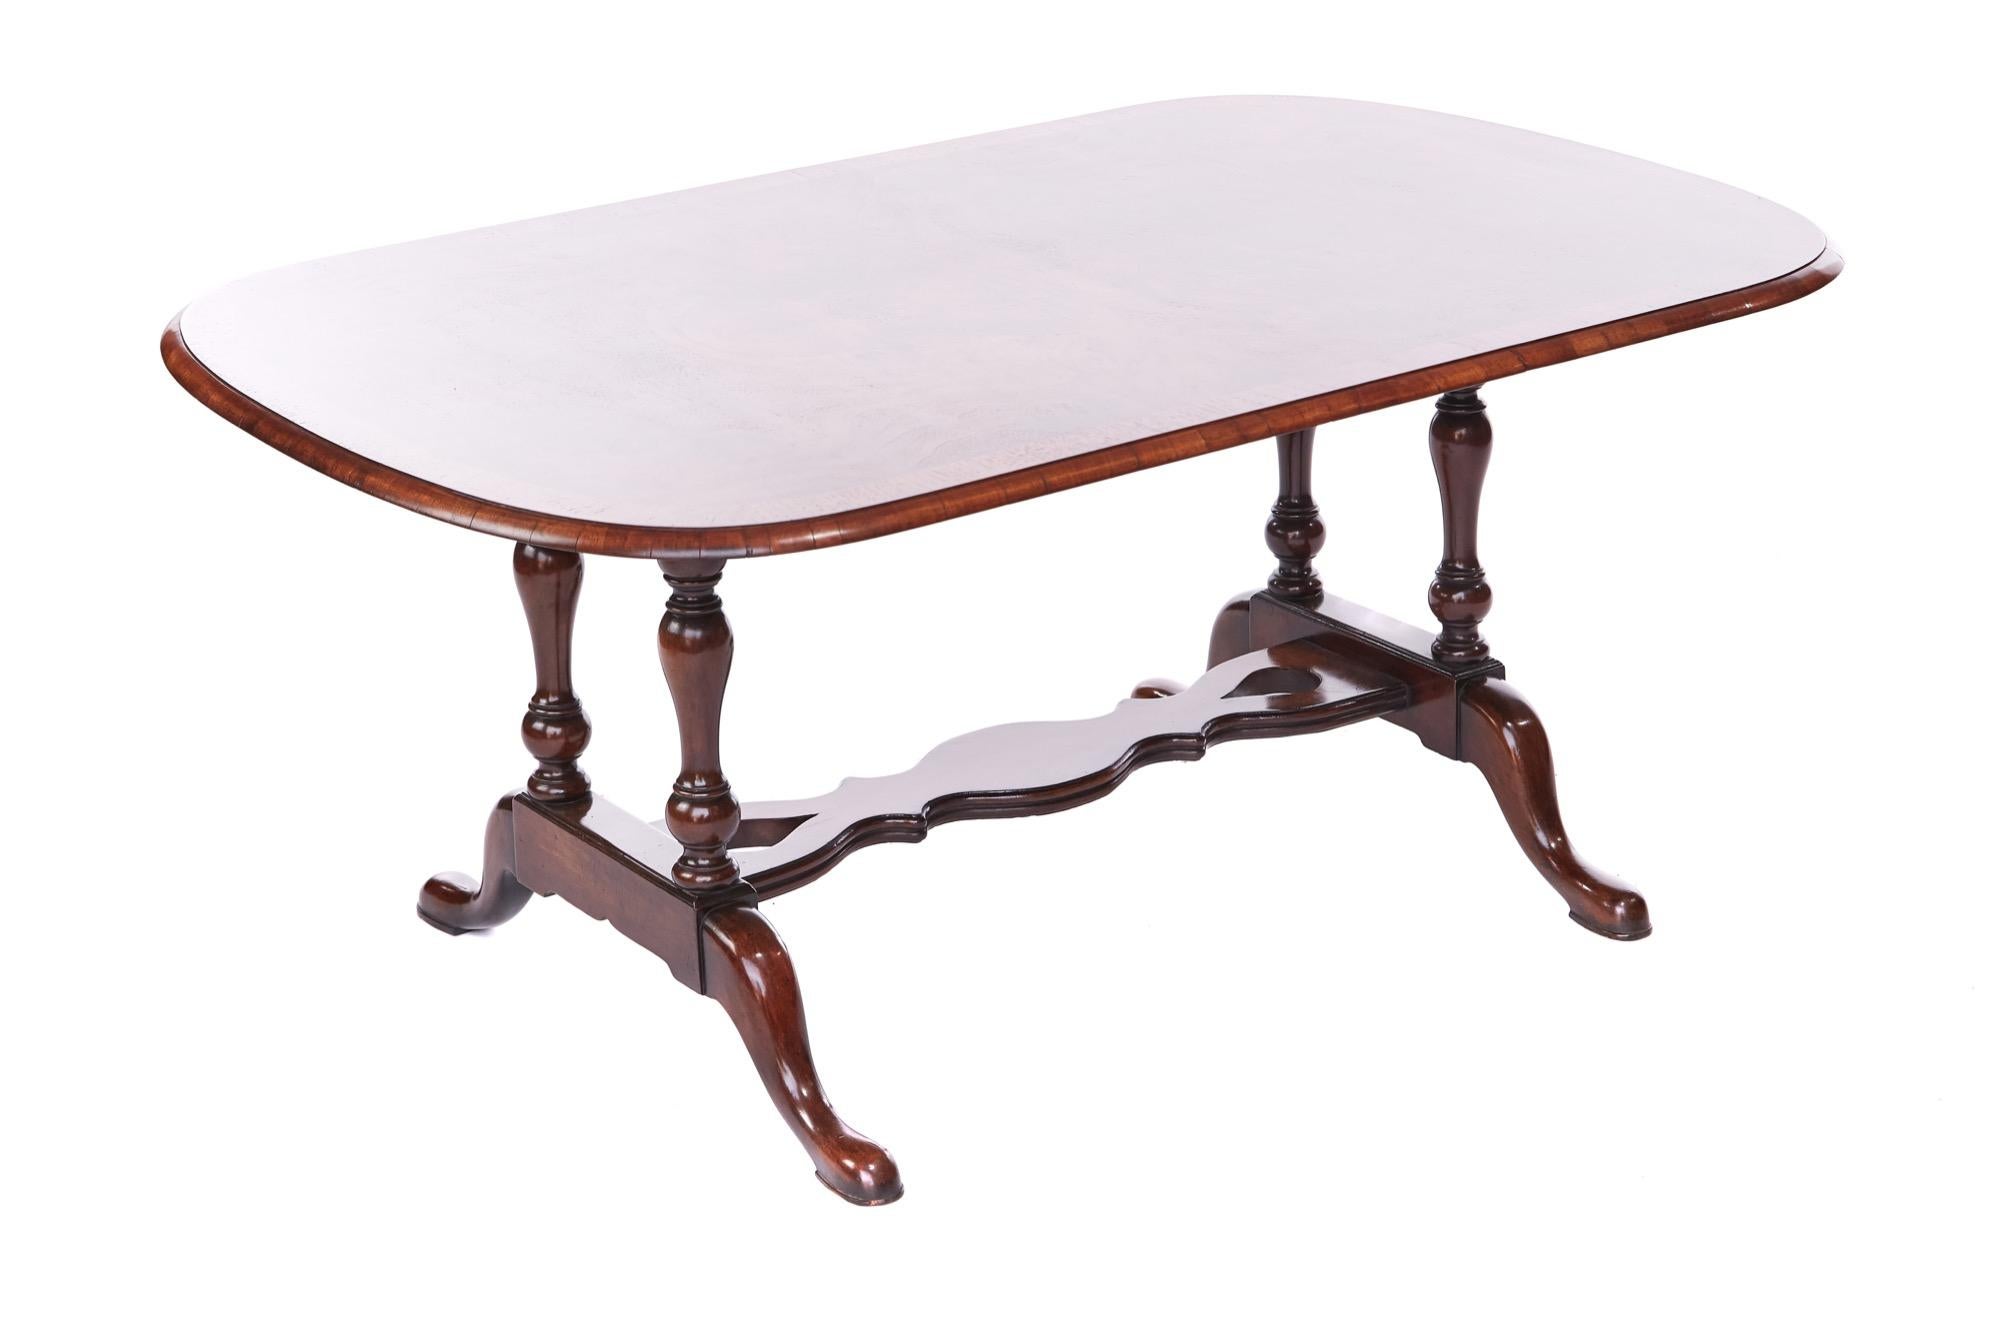 Fine antique Queen Anne style walnut coffee table having a stunning figured walnut top with book matched veneers and cross-banding, end supports with elegant turned twin columns, a platform shaped stretcher terminating in four attractive cabriole